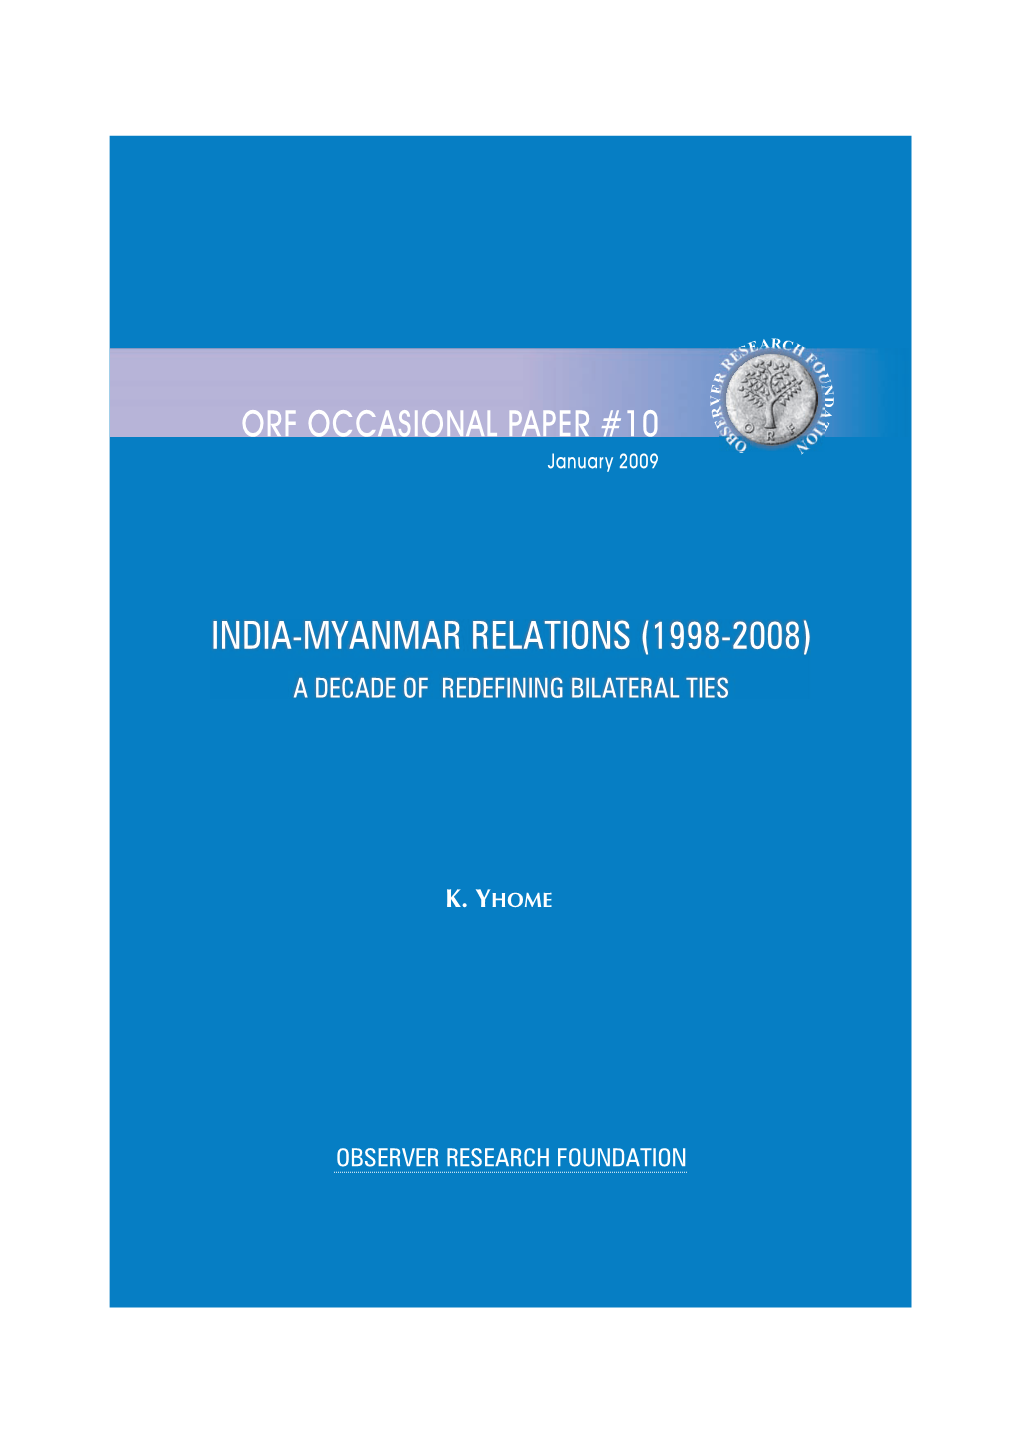 India-Myanmar Relations (1998-2008) a Decade of Redefining Bilateral Ties